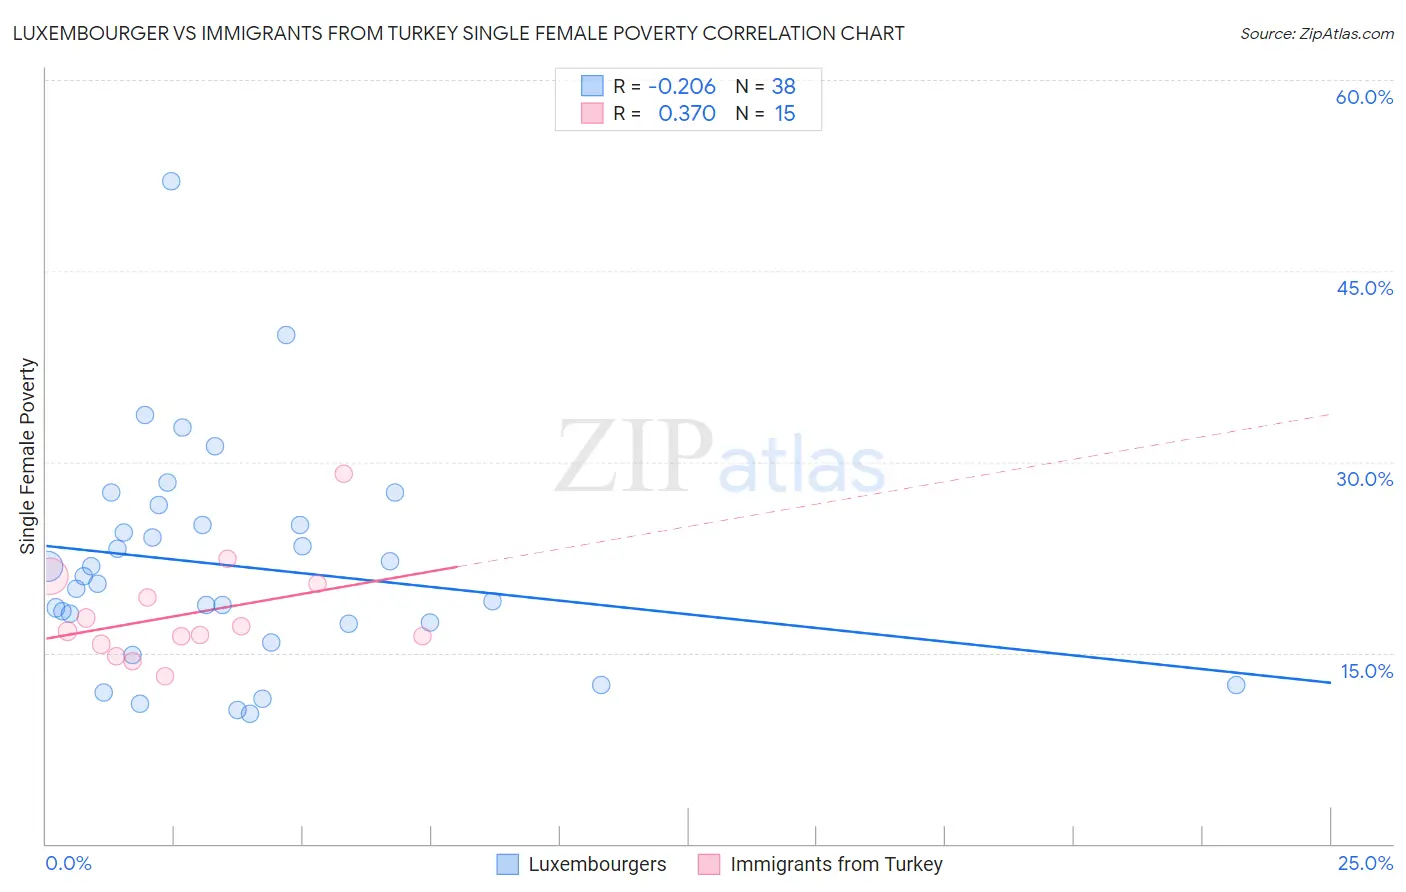 Luxembourger vs Immigrants from Turkey Single Female Poverty